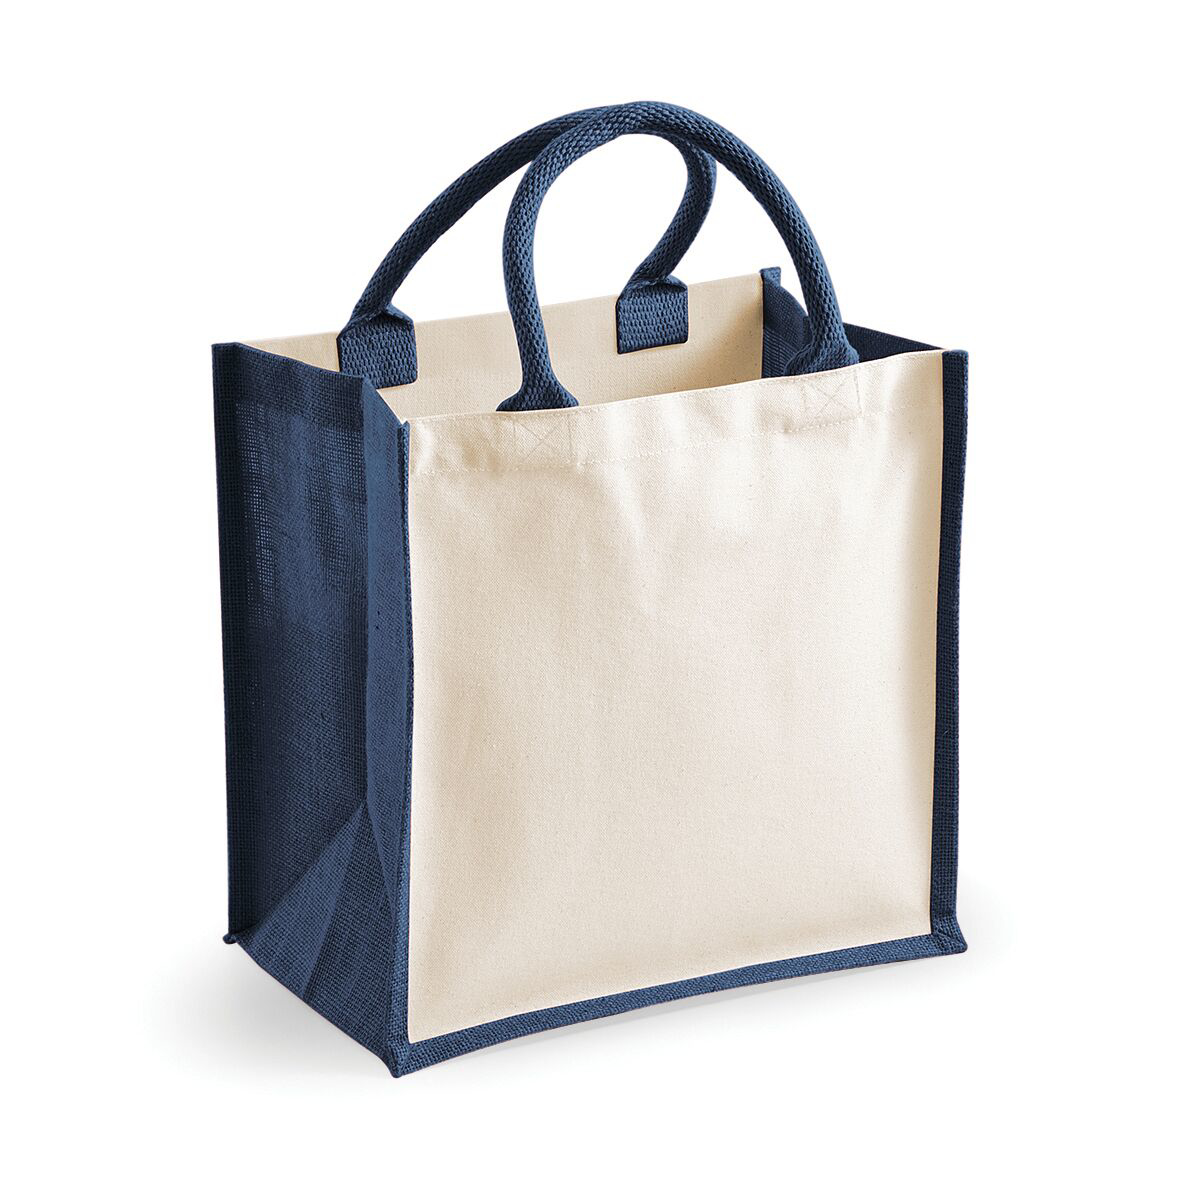 natural jute bag with navy side panels and short handles